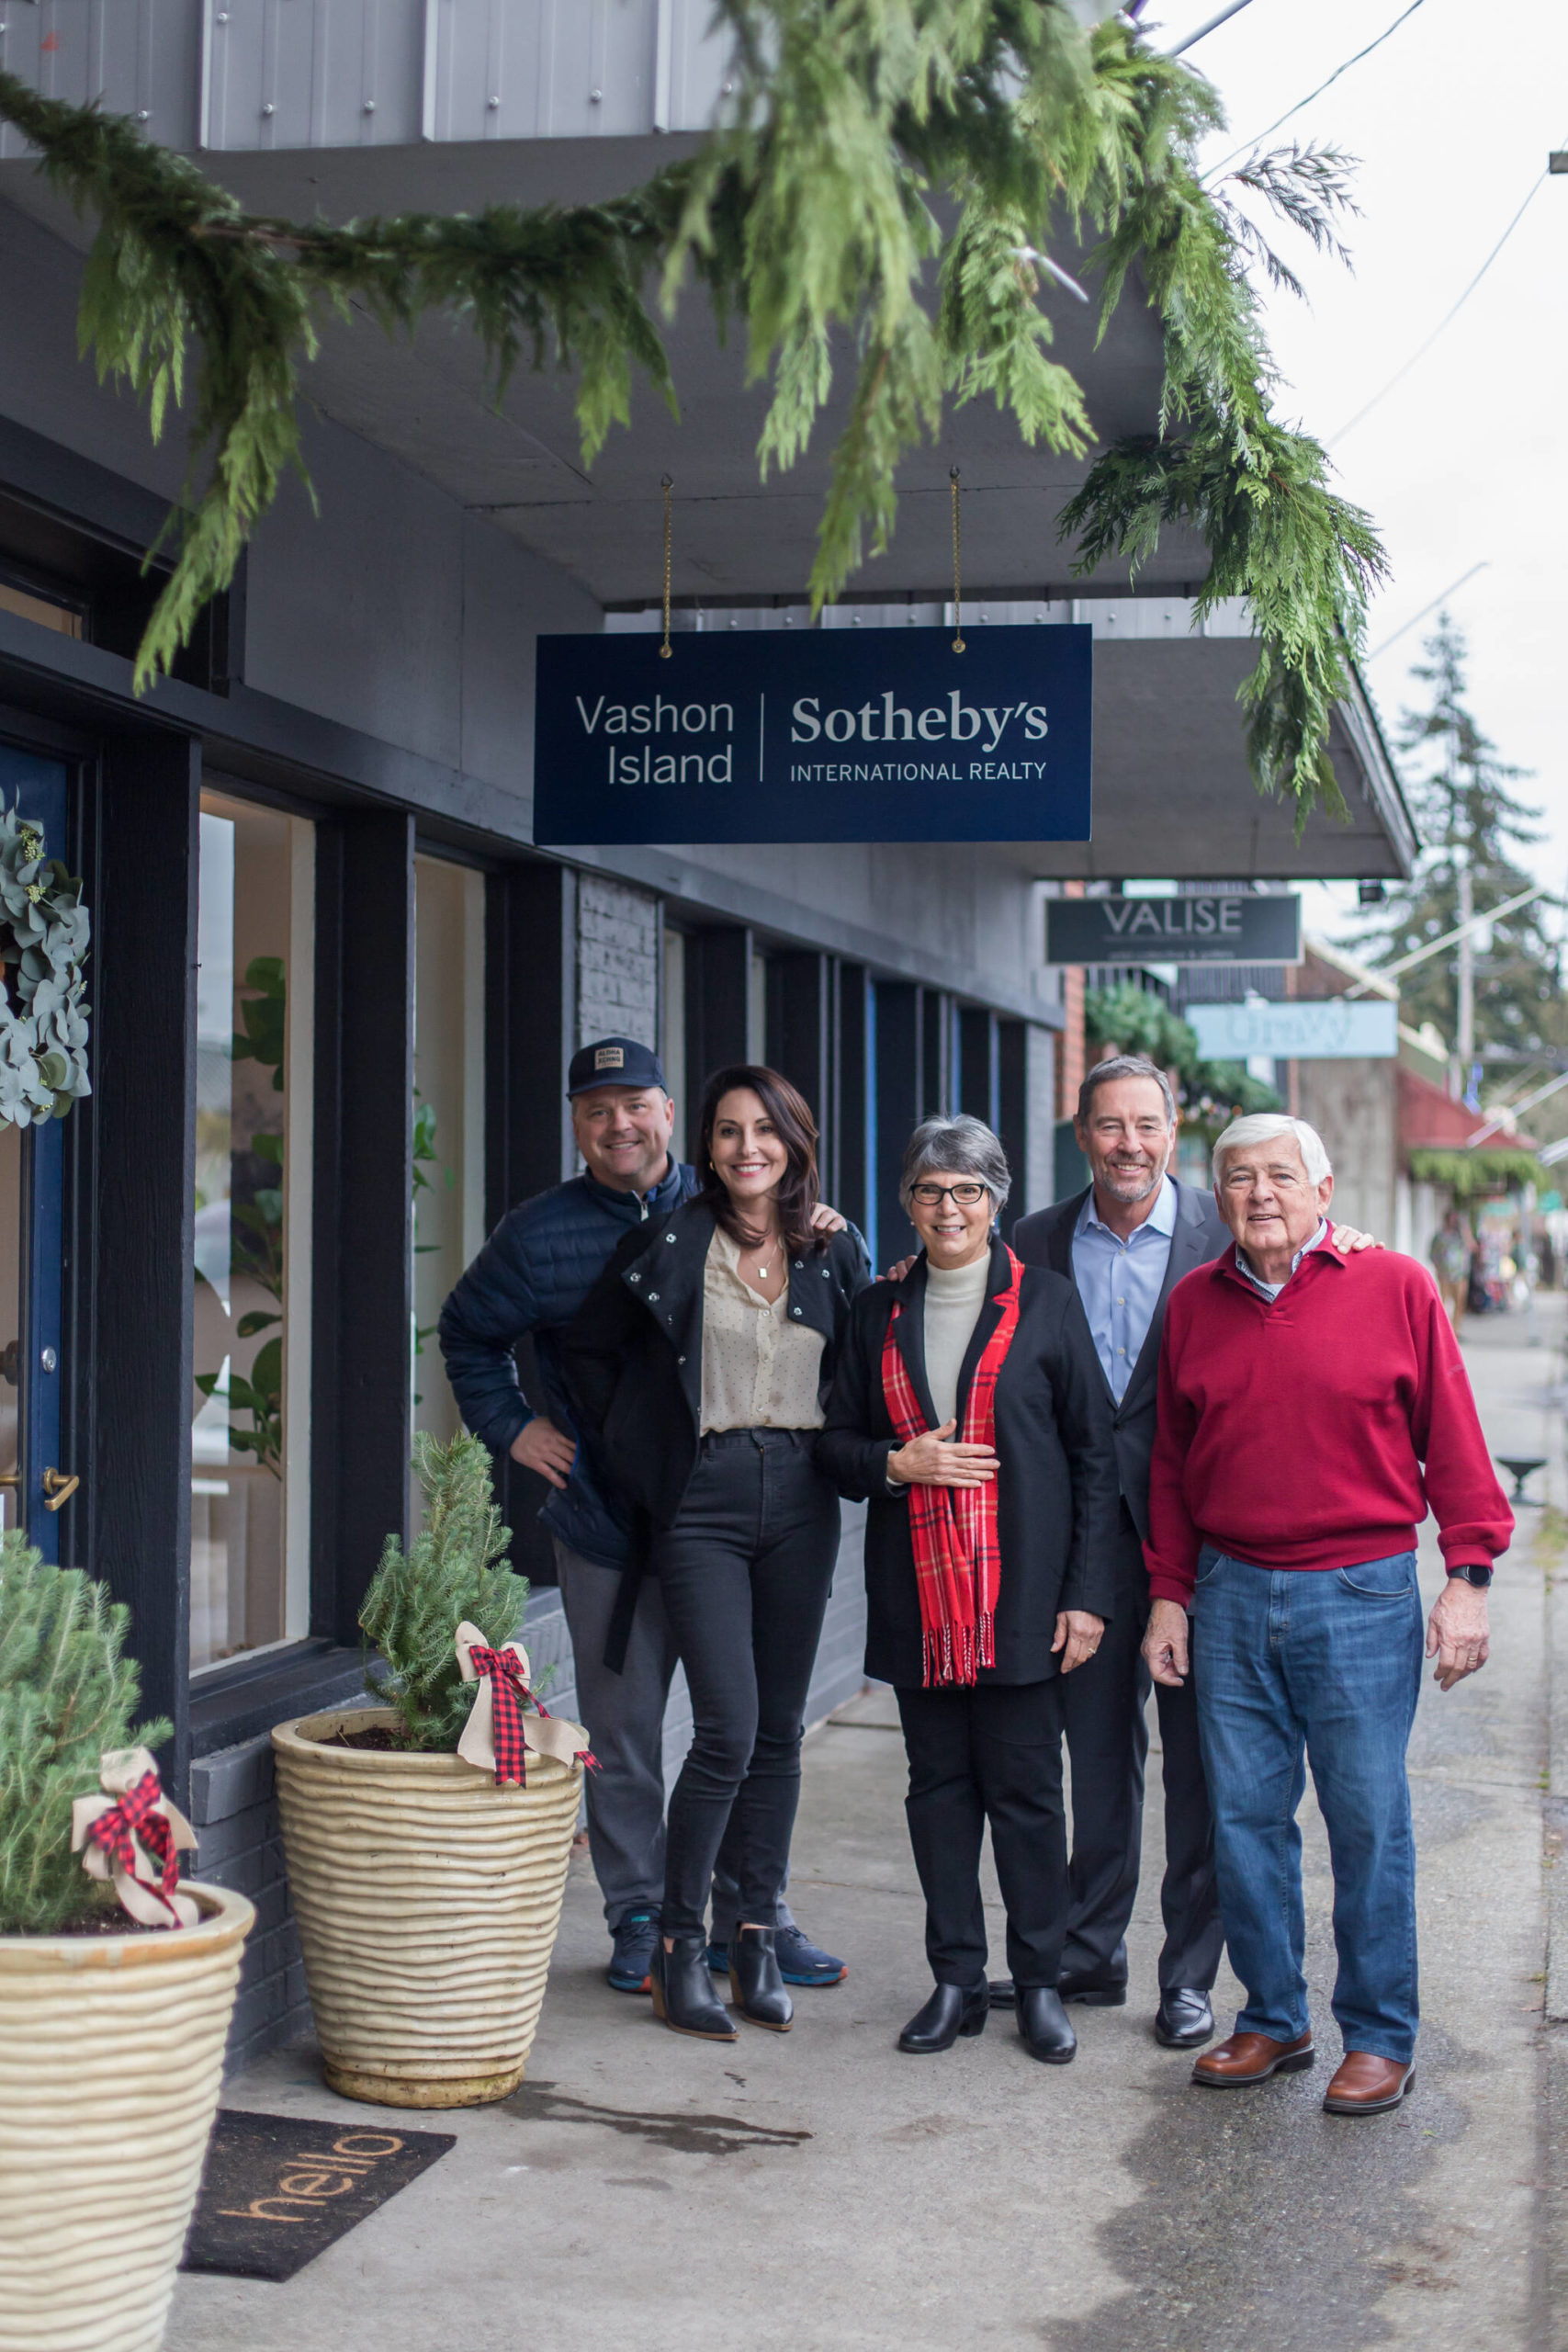 (Left to right) Preben Martin, Nicole Donnelly Martin, Linda Bianchi, Calvin Lyford, regional VP for Sotheby’s International Affiliates, and Dick Bianchi celebrate the opening of a new real estate venture in downtown Vashon (Mallory MacDonald/Maxwell Creative Photo).